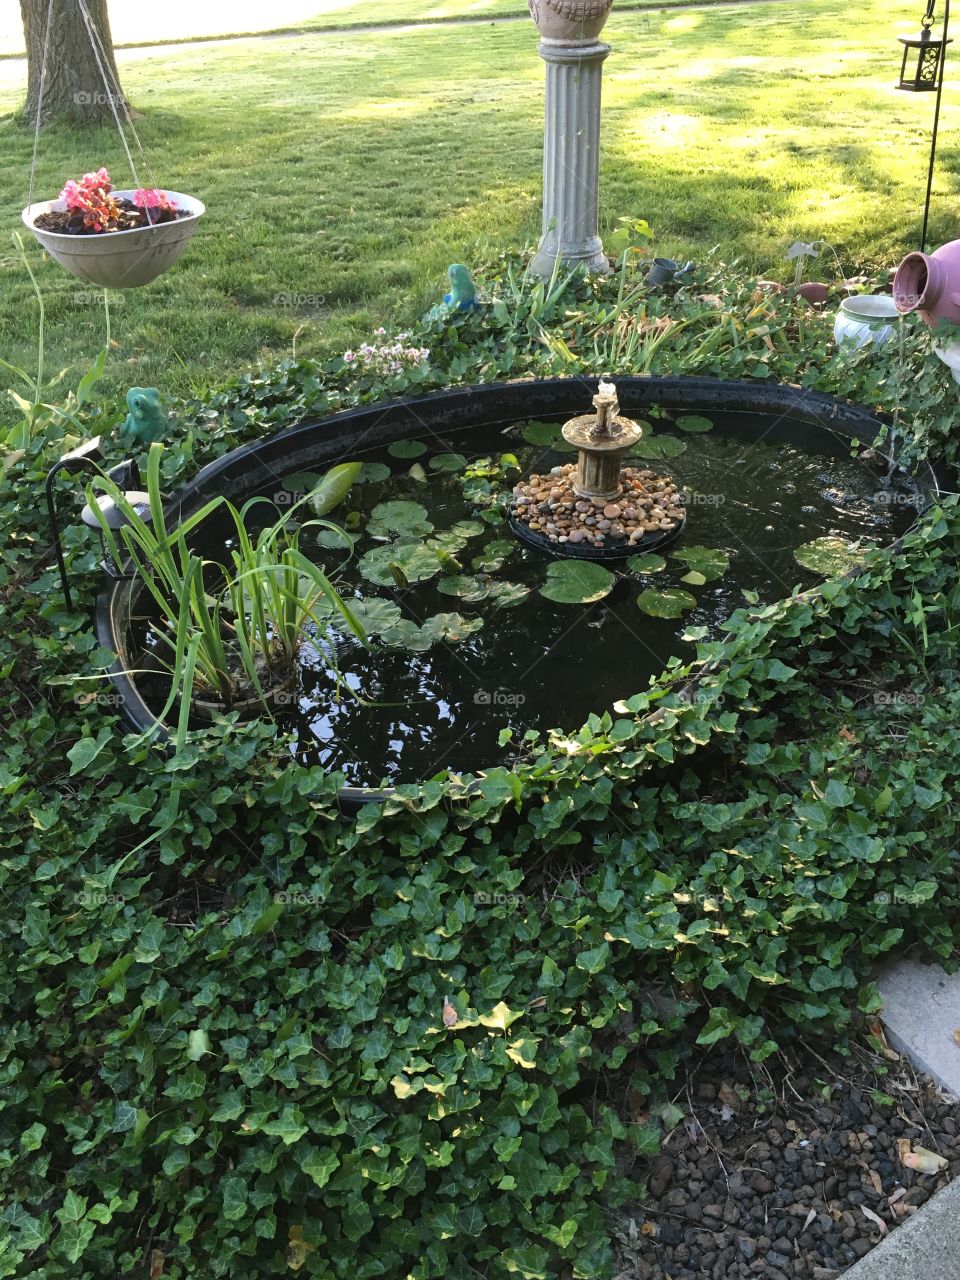 Pond outside family home